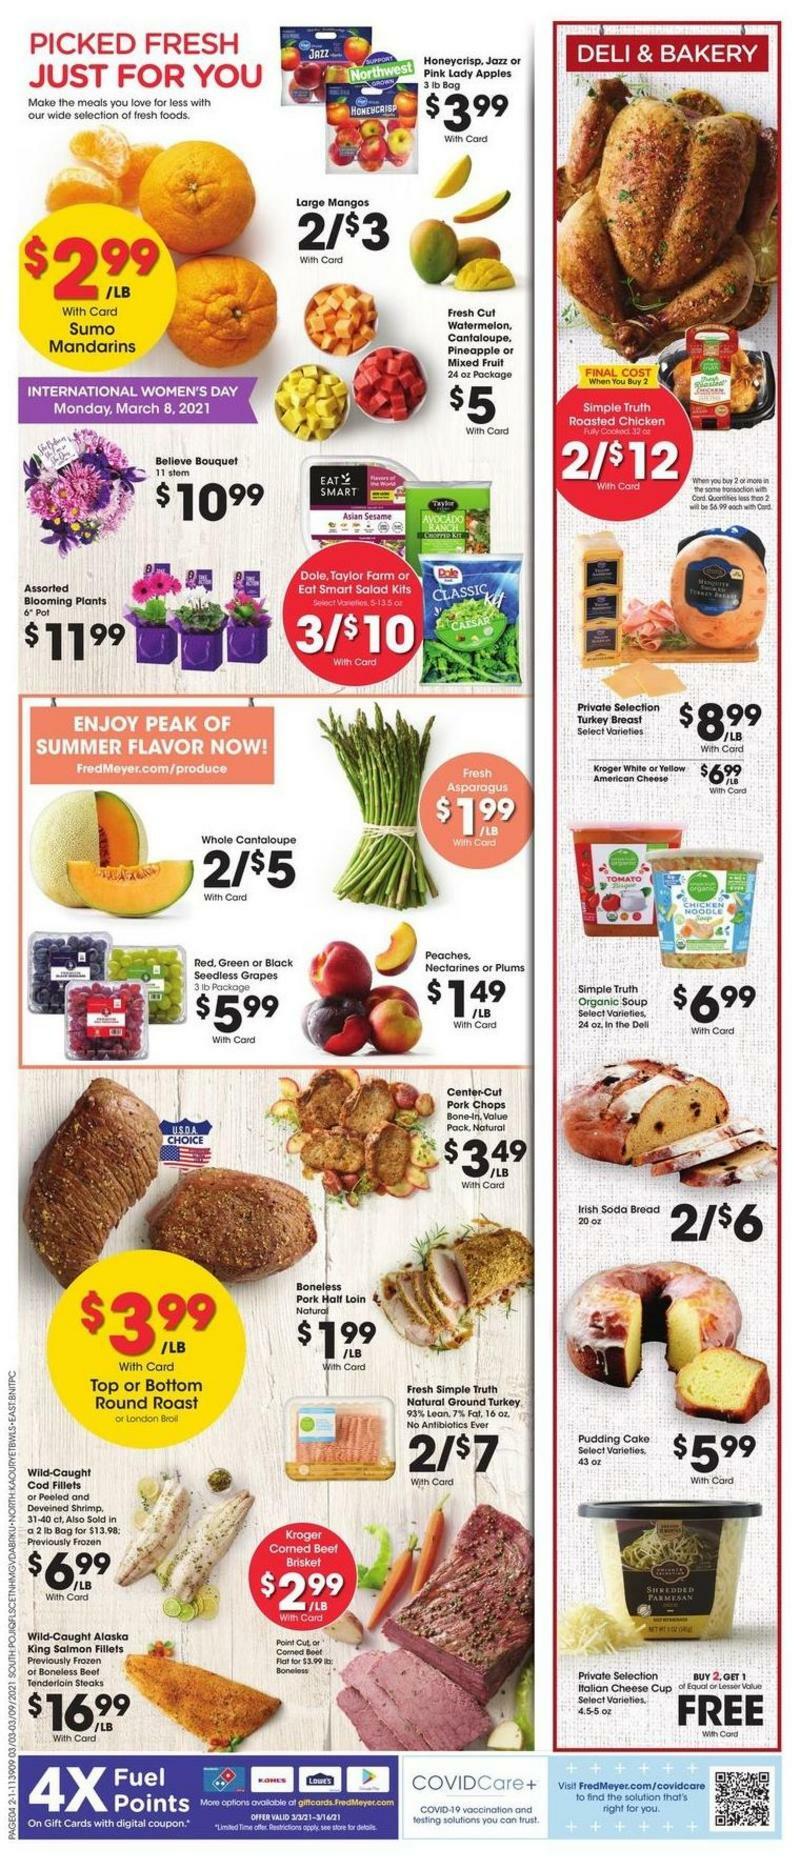 Fred Meyer Weekly Ad from March 3